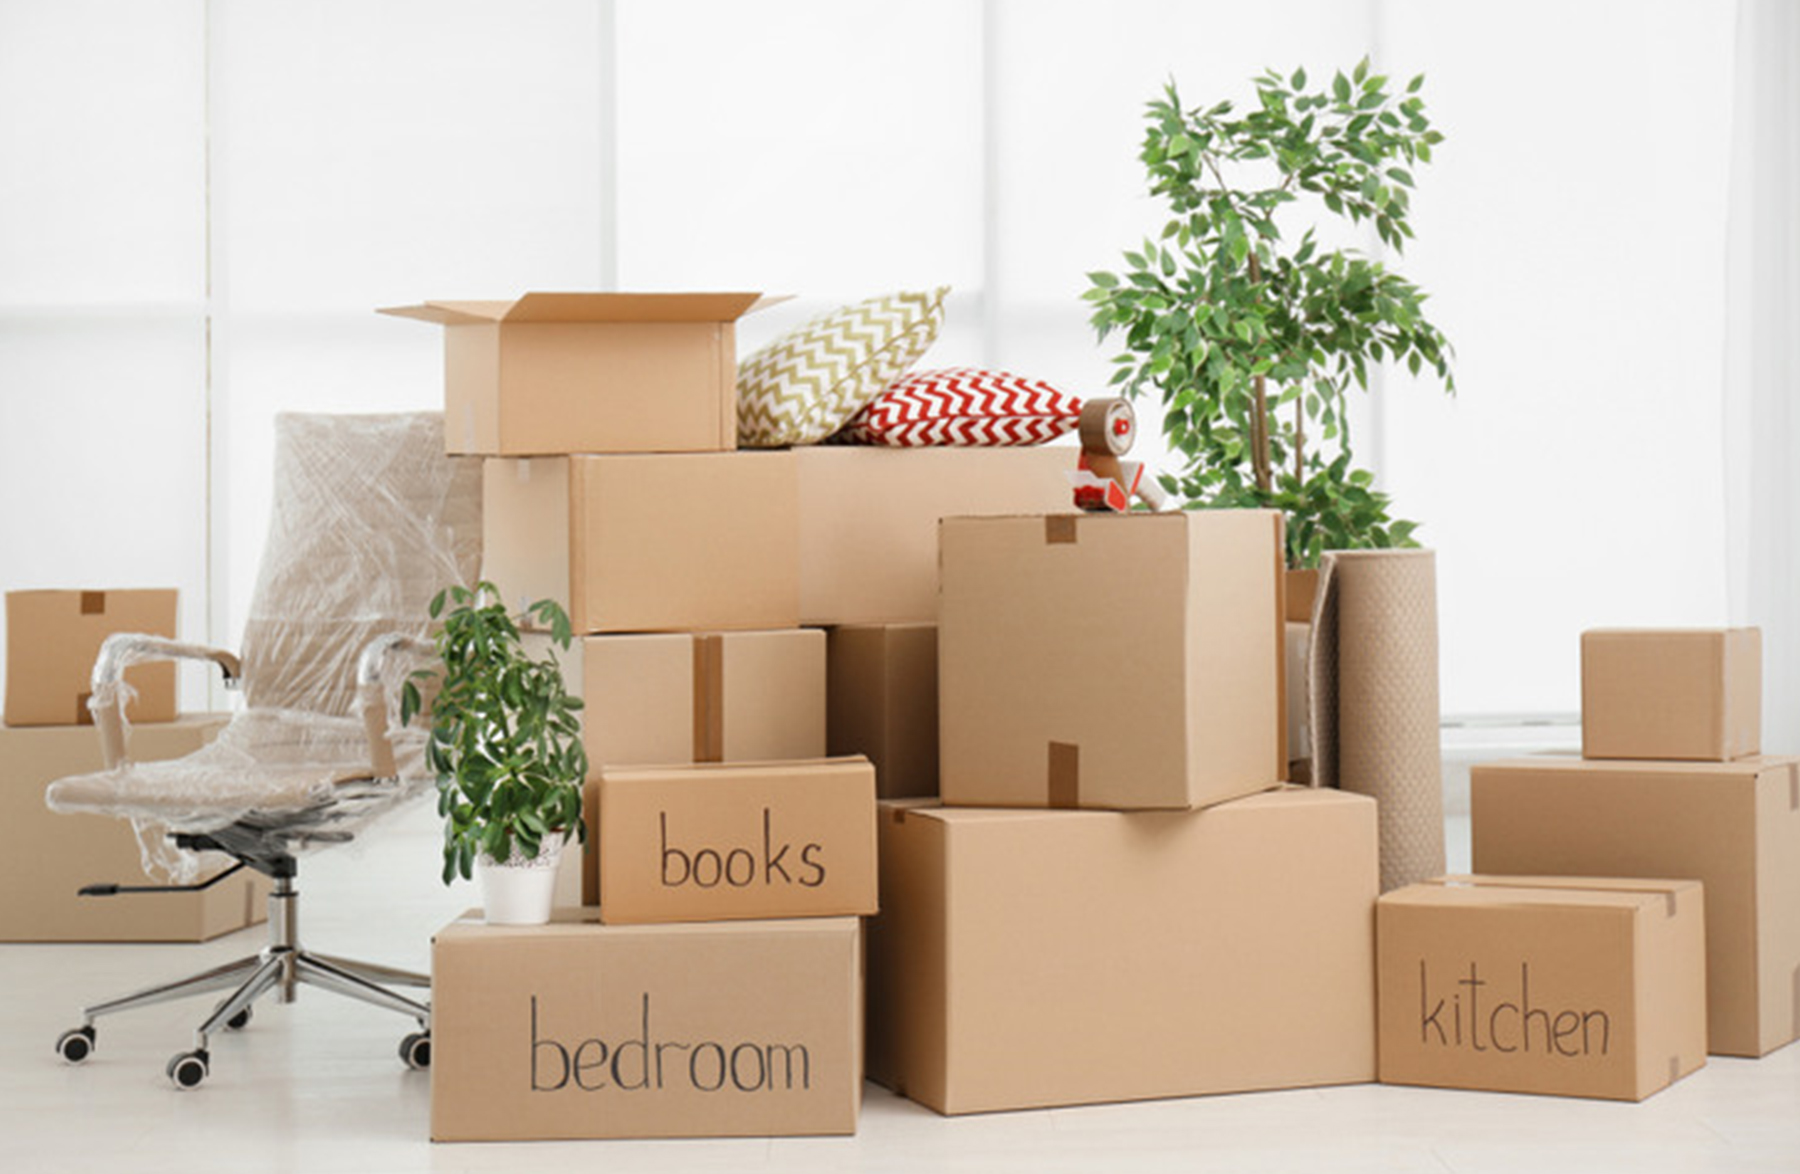 5 Tips For Labeling Your Moving Boxes Like A Pro - San Antonio Movers | Move  Pros